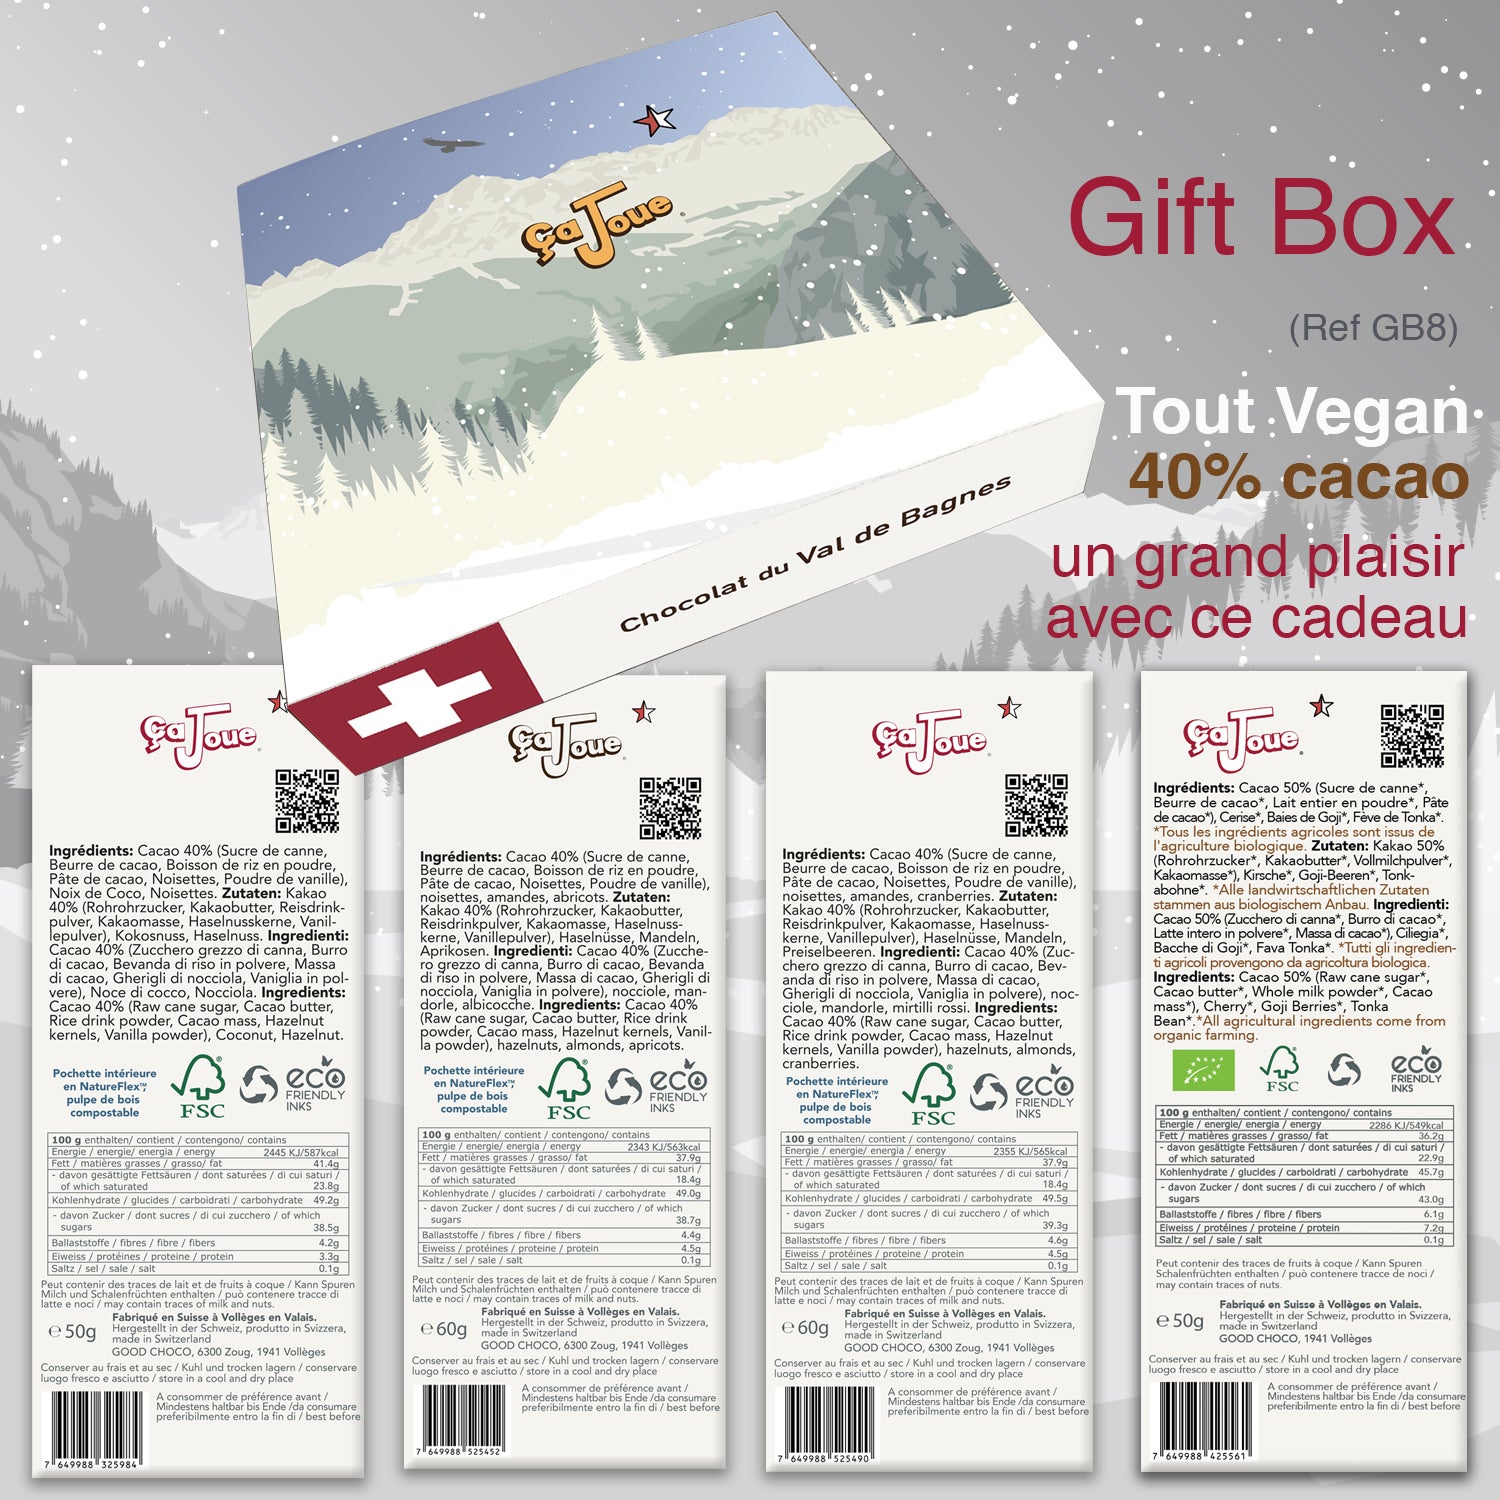 Gift Box (Ref GB8) Chocolate from Val de Bagnes